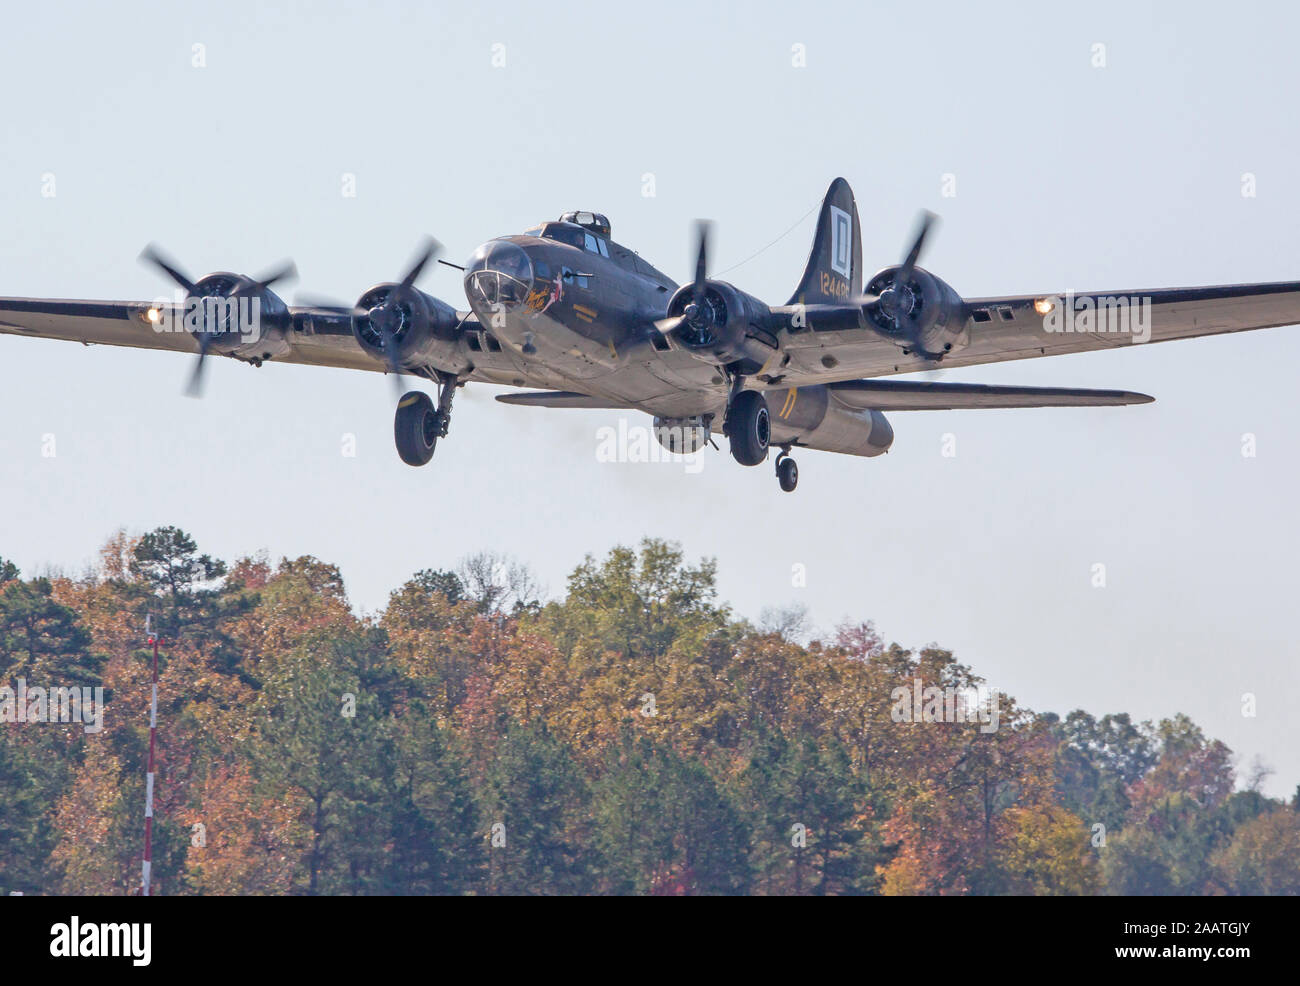 MONROE, NC (USA) - November 9, 2019:  A B-17 bomber used in the filming of the movie 'Memphis Belle' flies at treetop level at an air show. Stock Photo